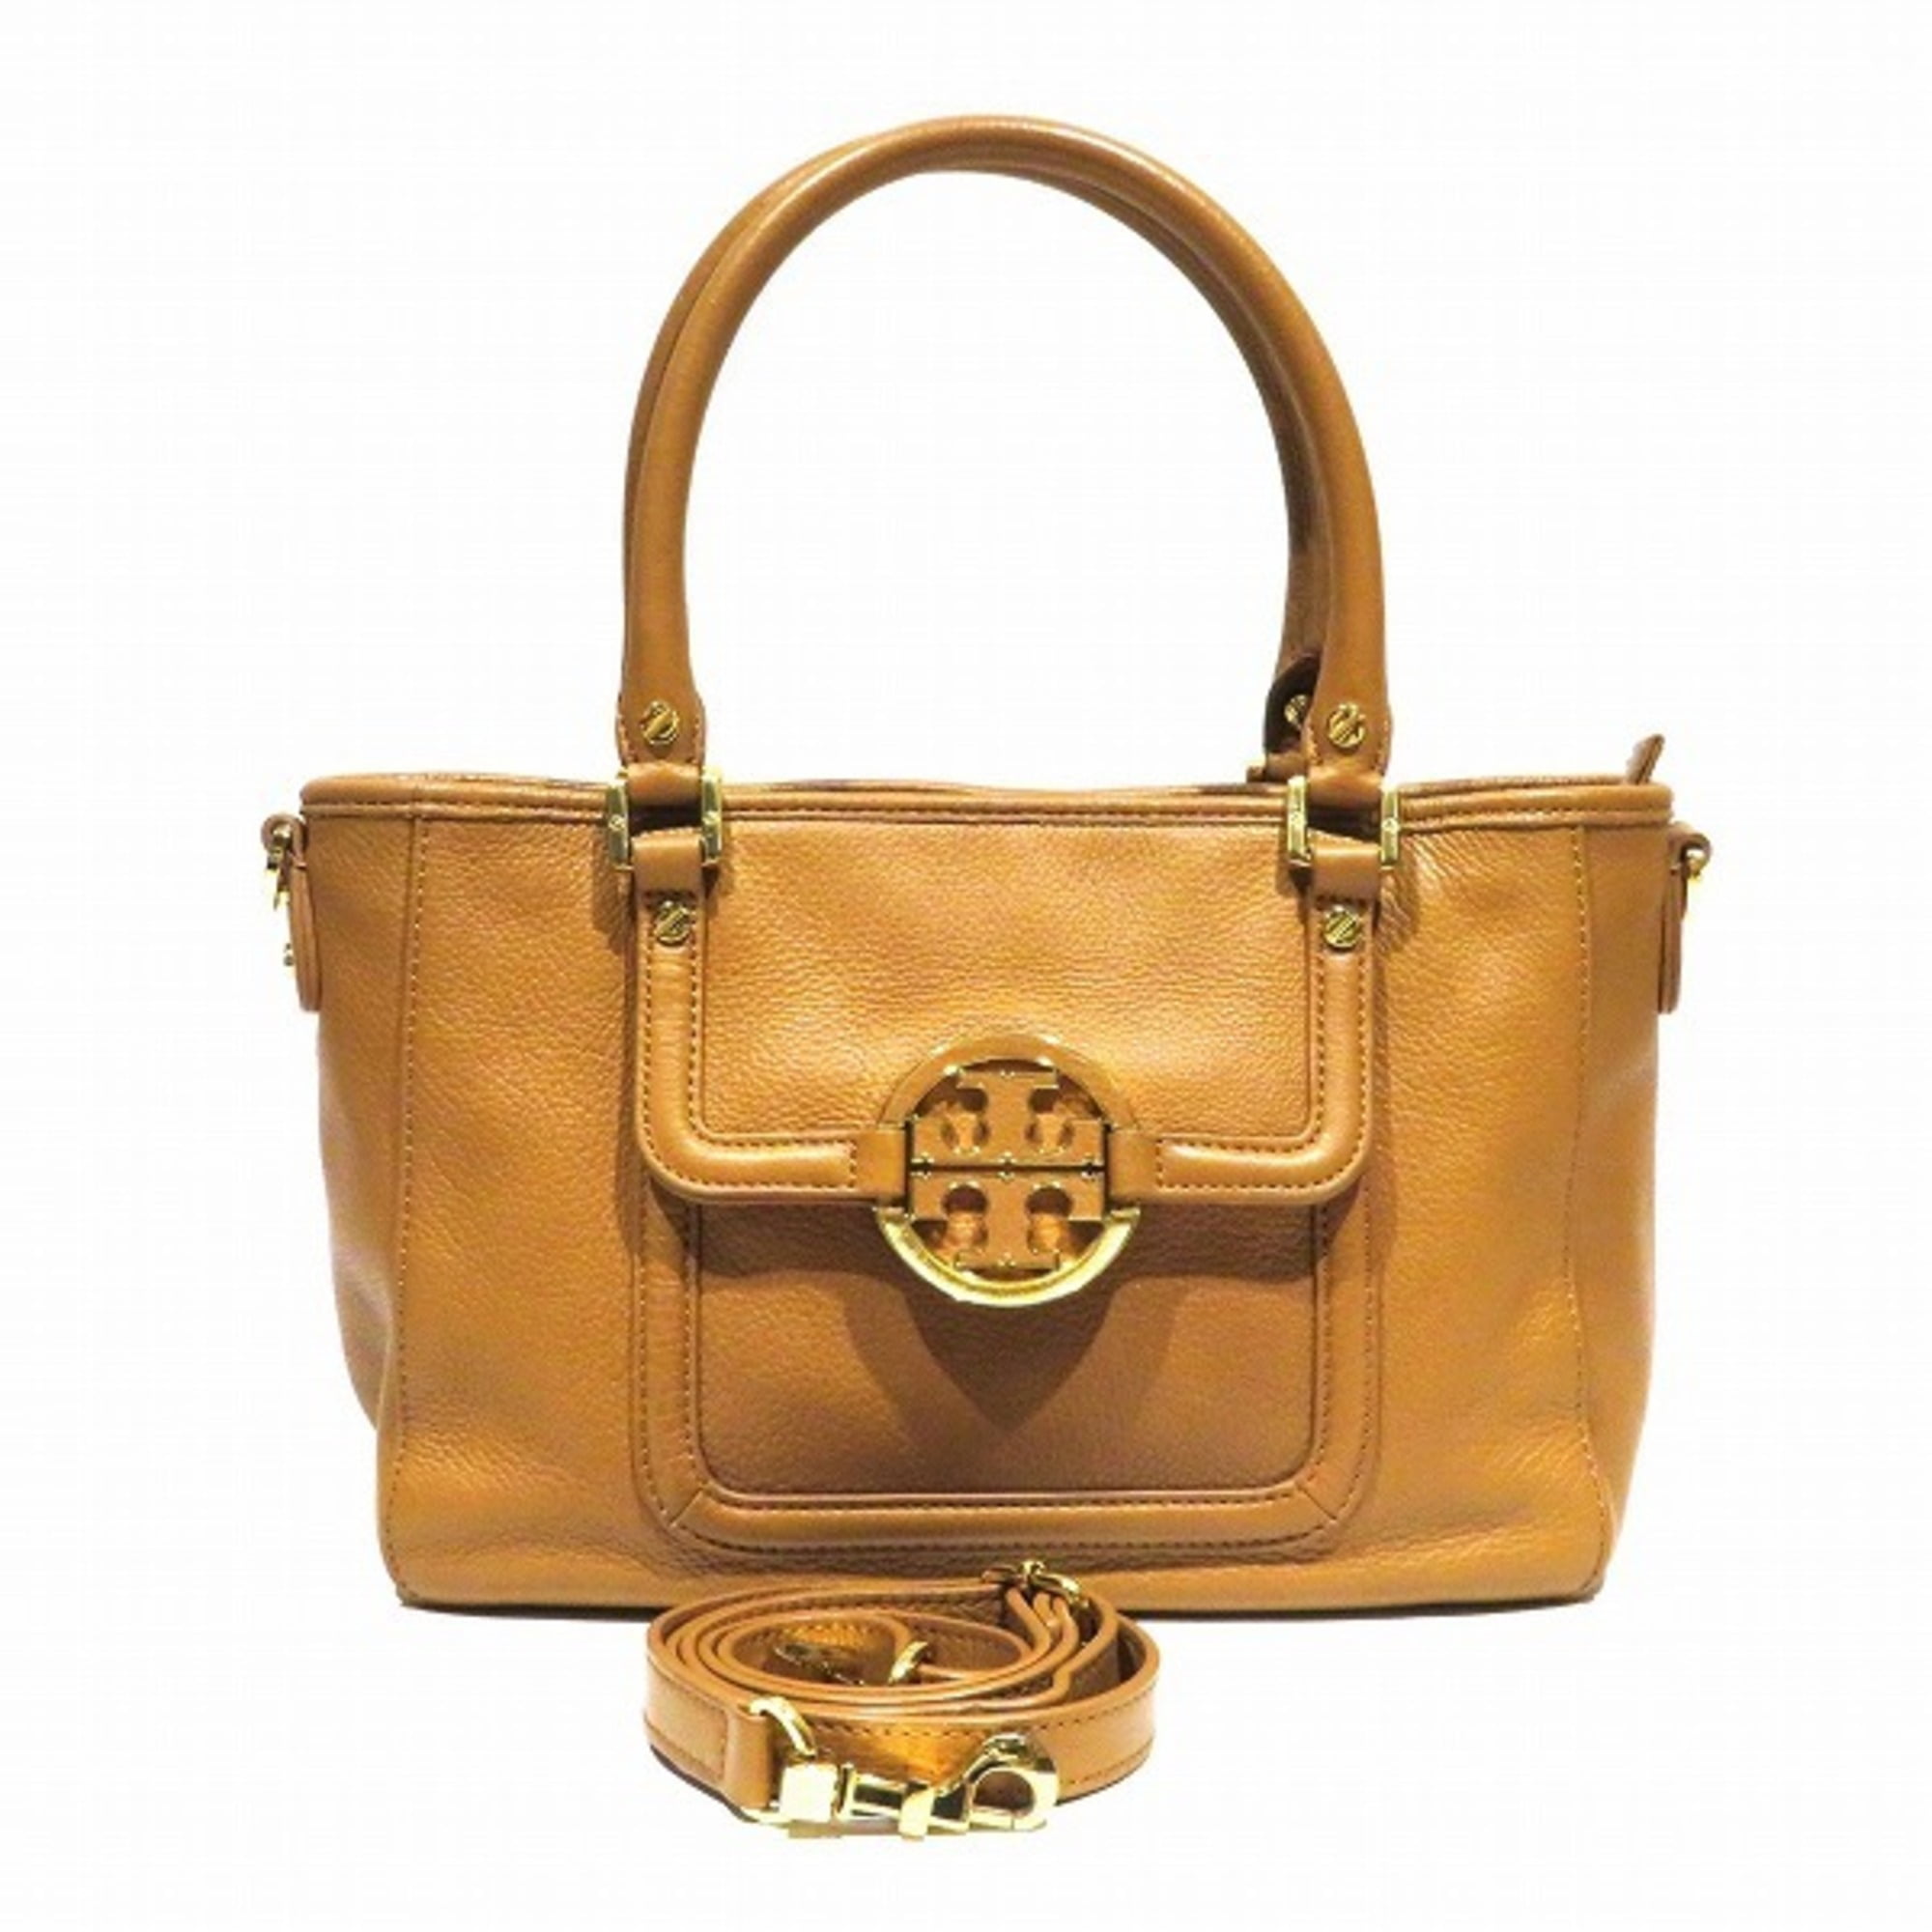 authenticate how to check tory burch serial number